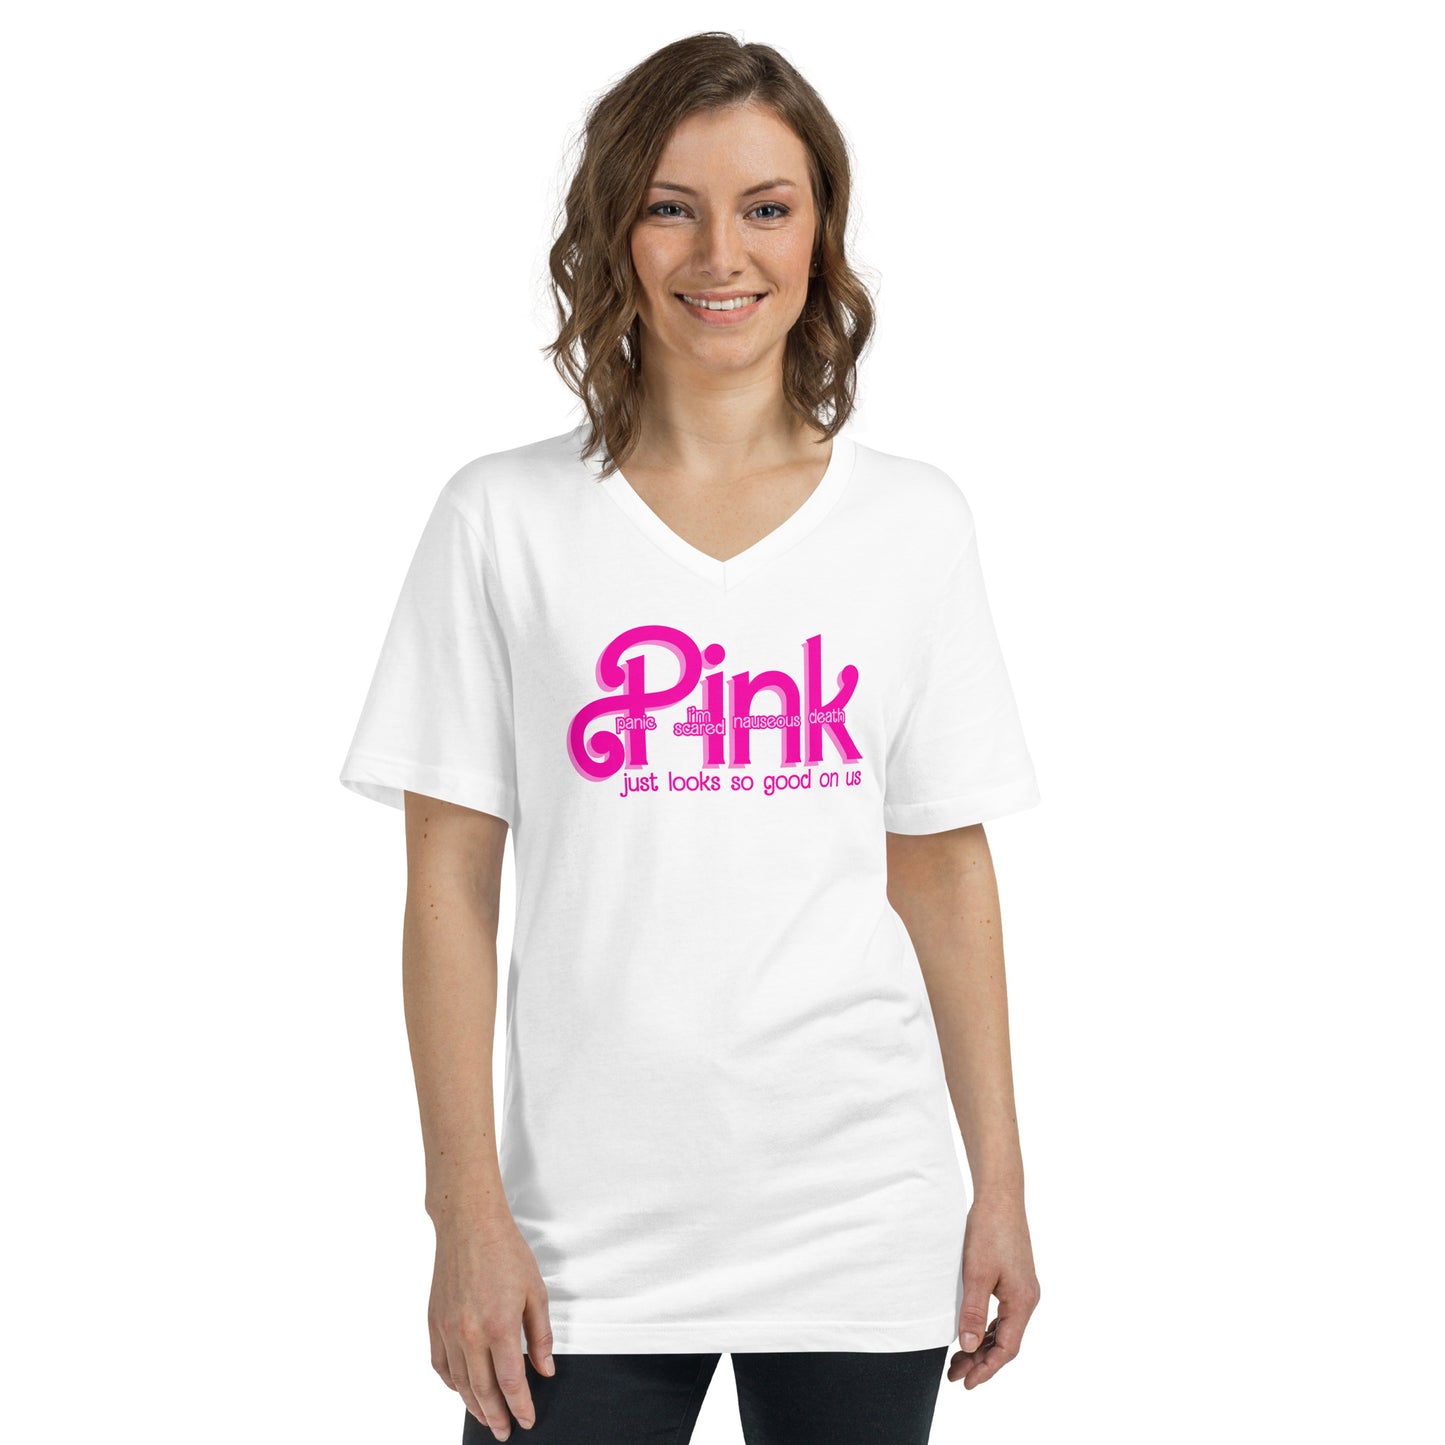 The PINK V-Neck Tee